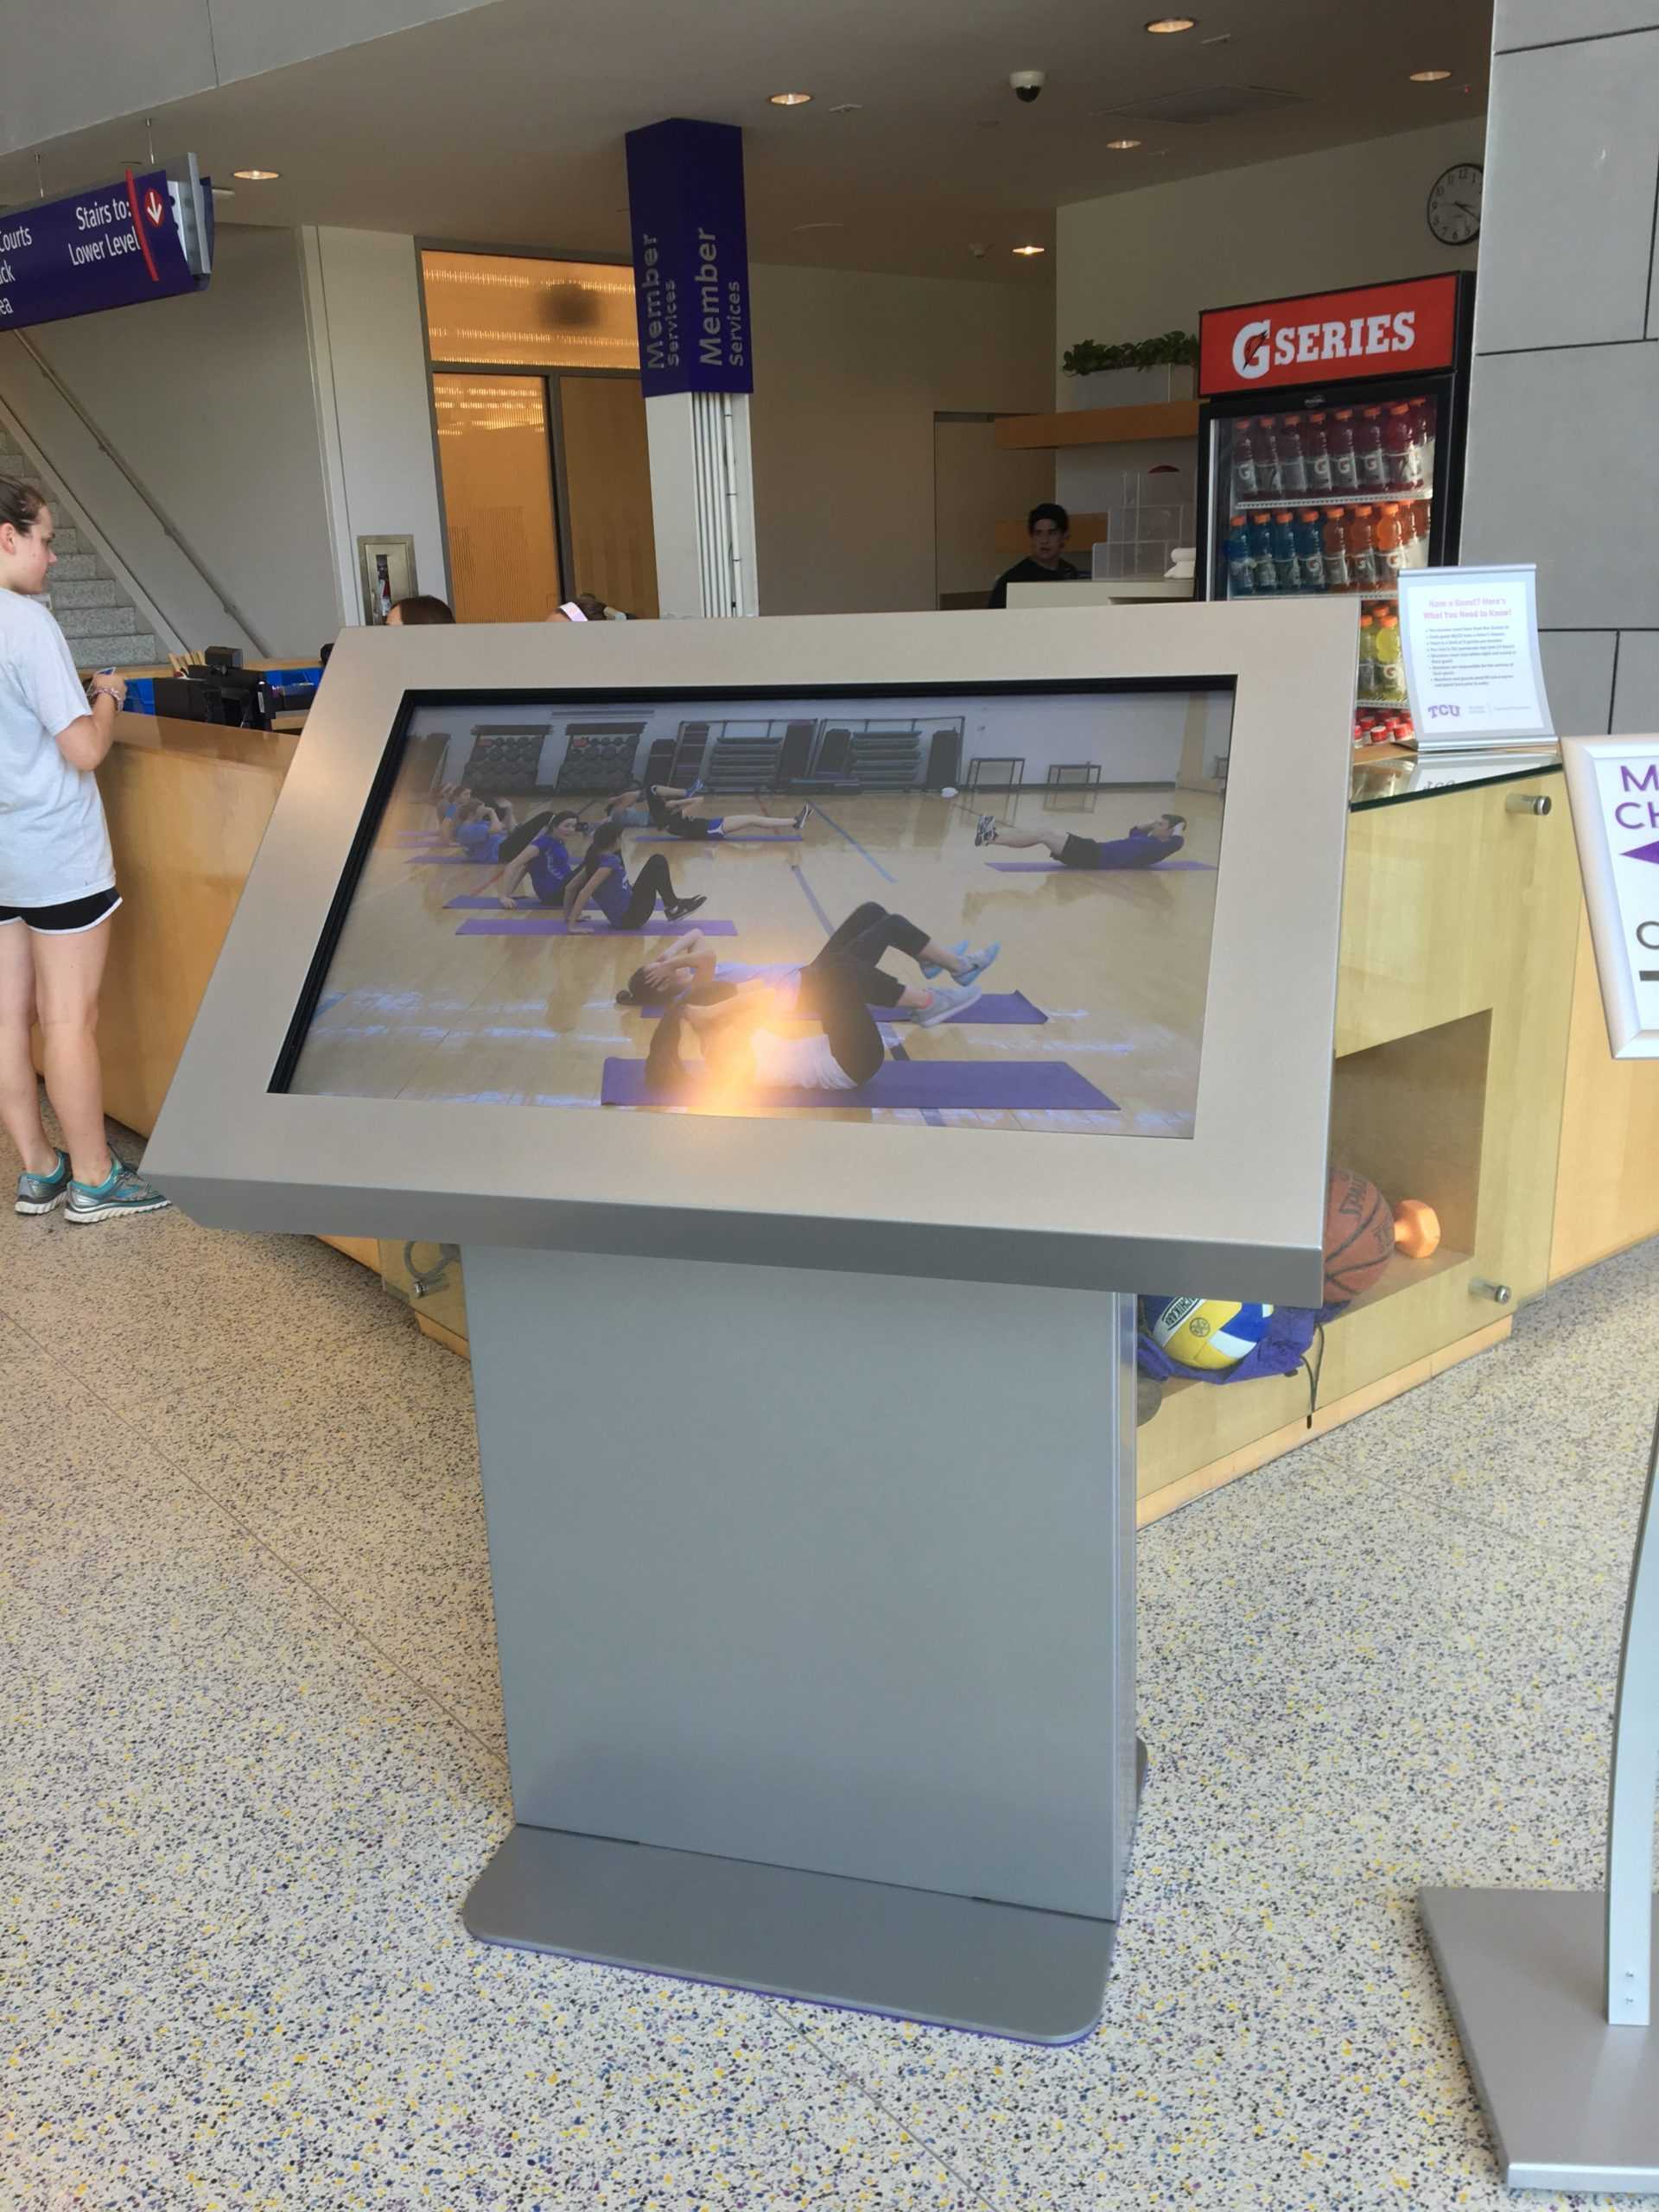 A new interactive screen can be found at the entrance of the rec center. More will be installed by the end of the month.